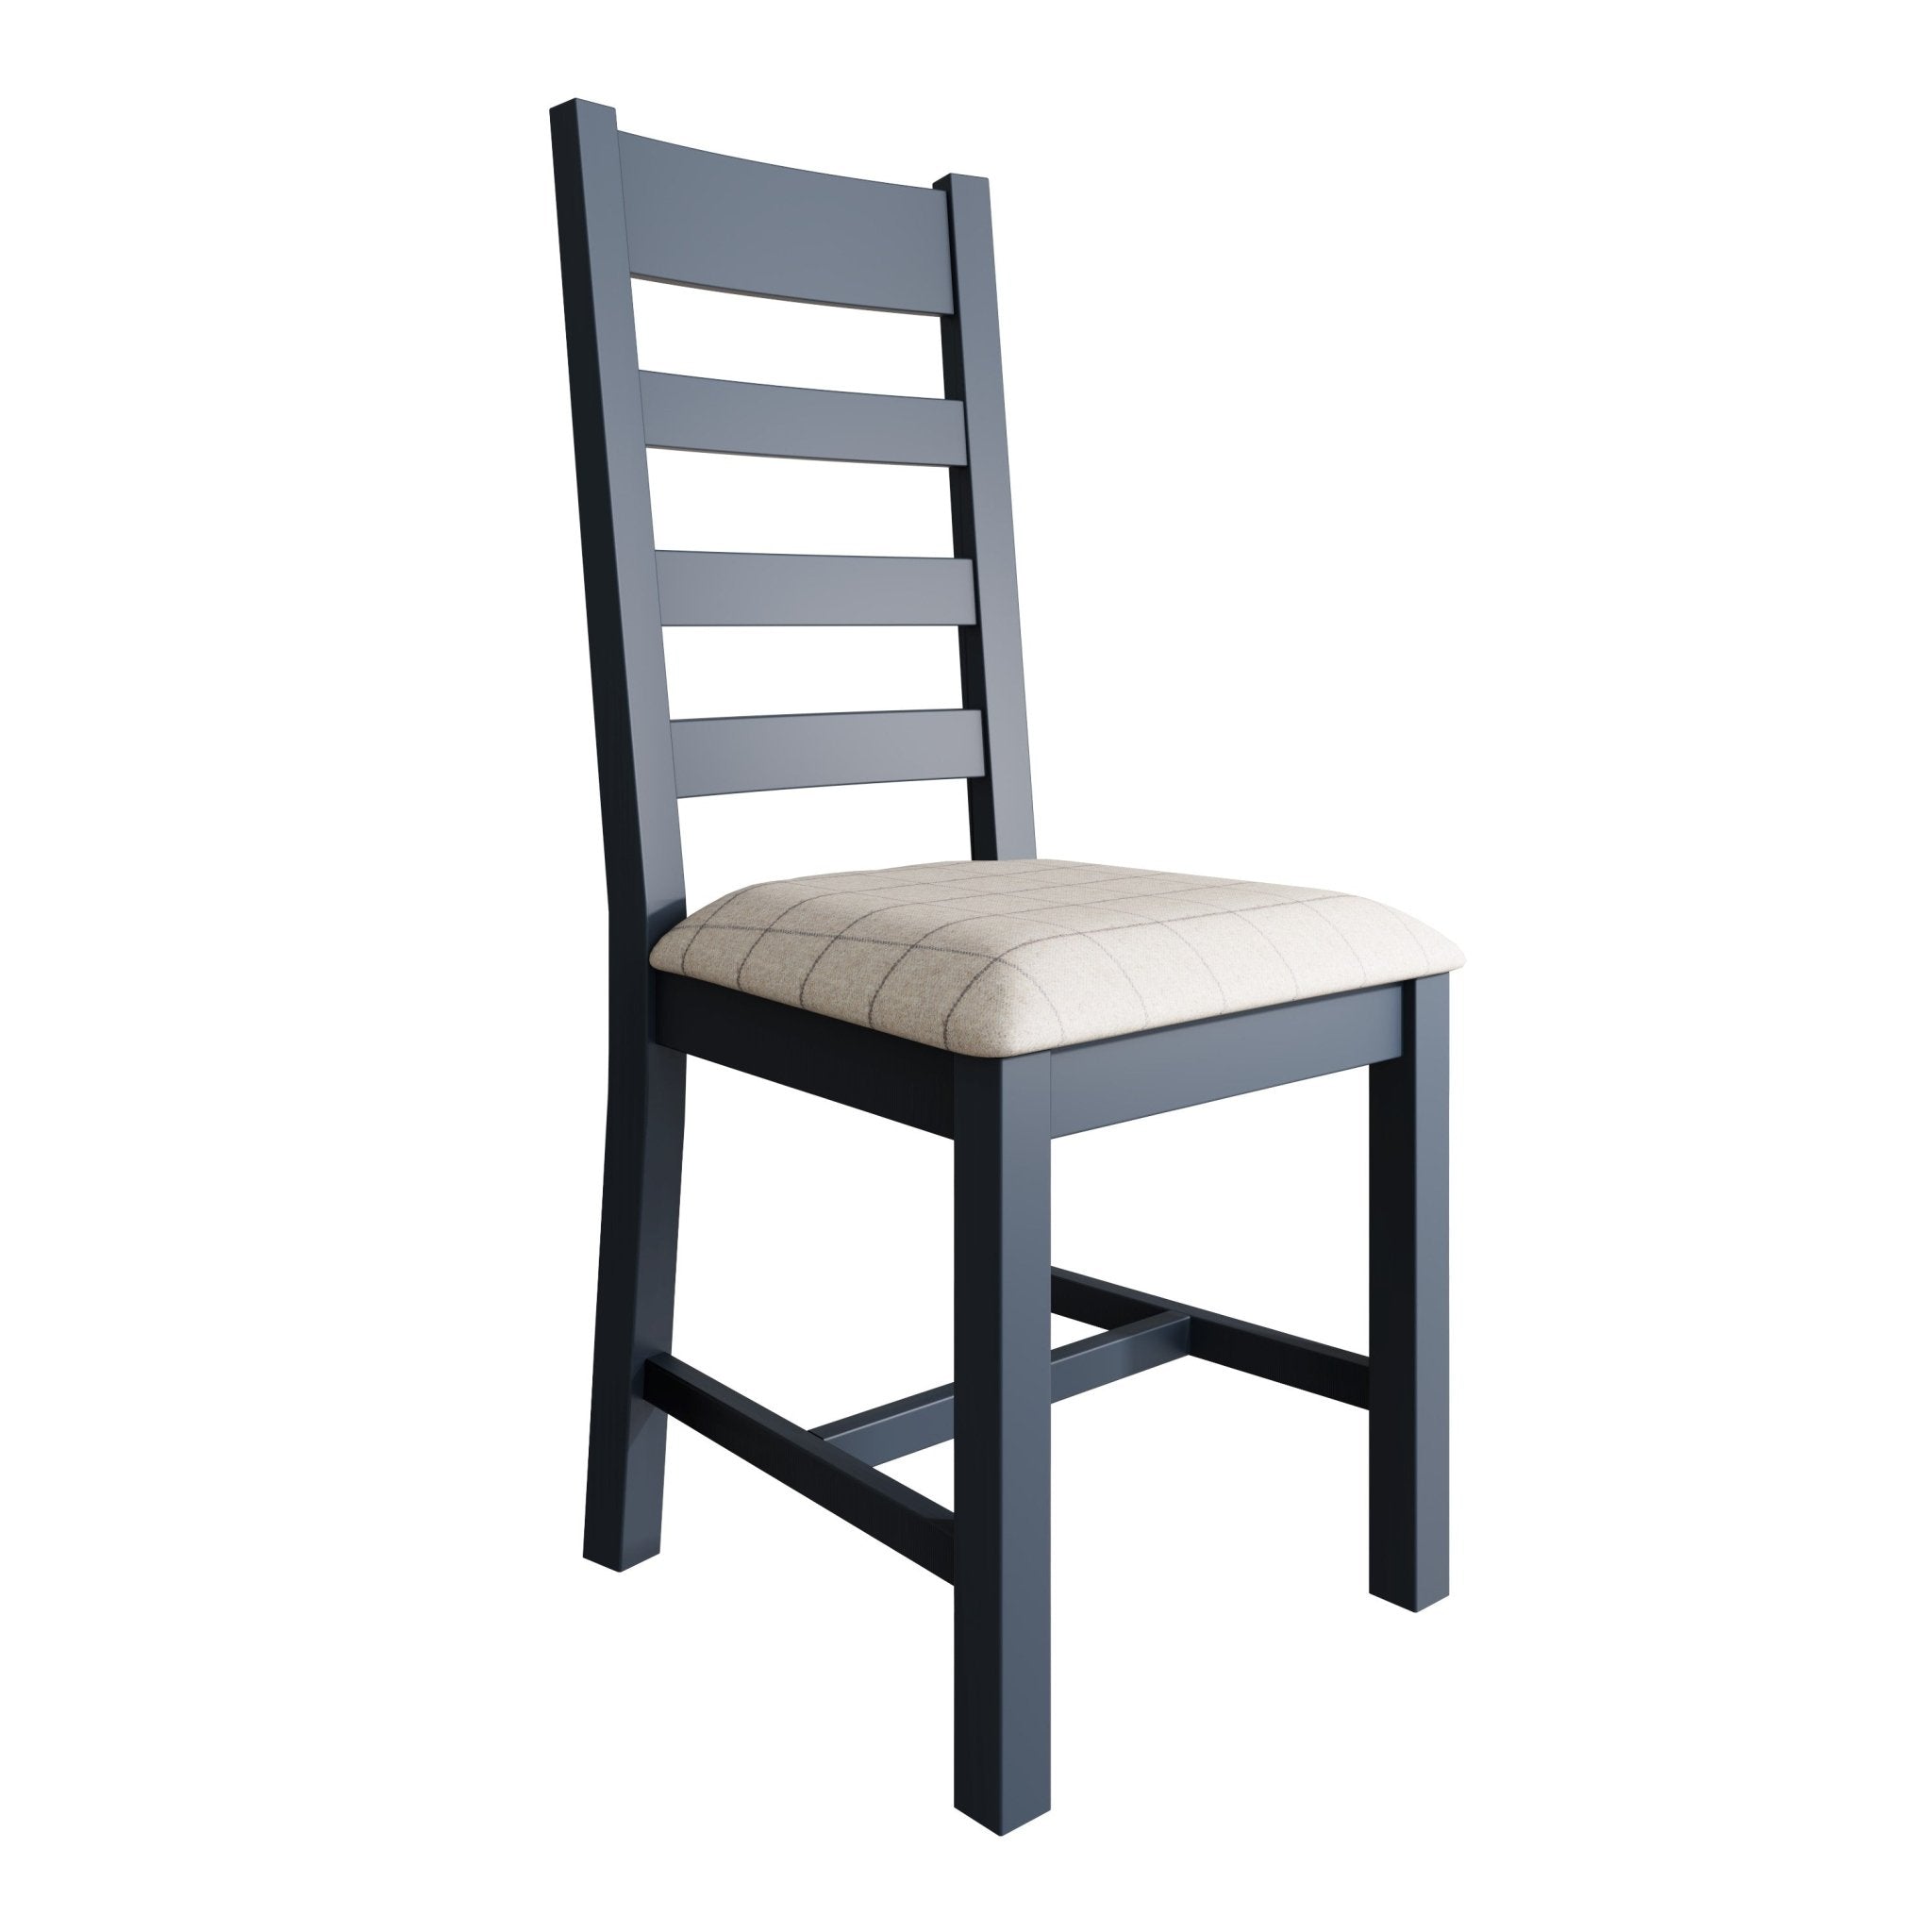 Rogate Blue Painted Slatted Fabric Dining Chair - Natural Check - Duck Barn Interiors